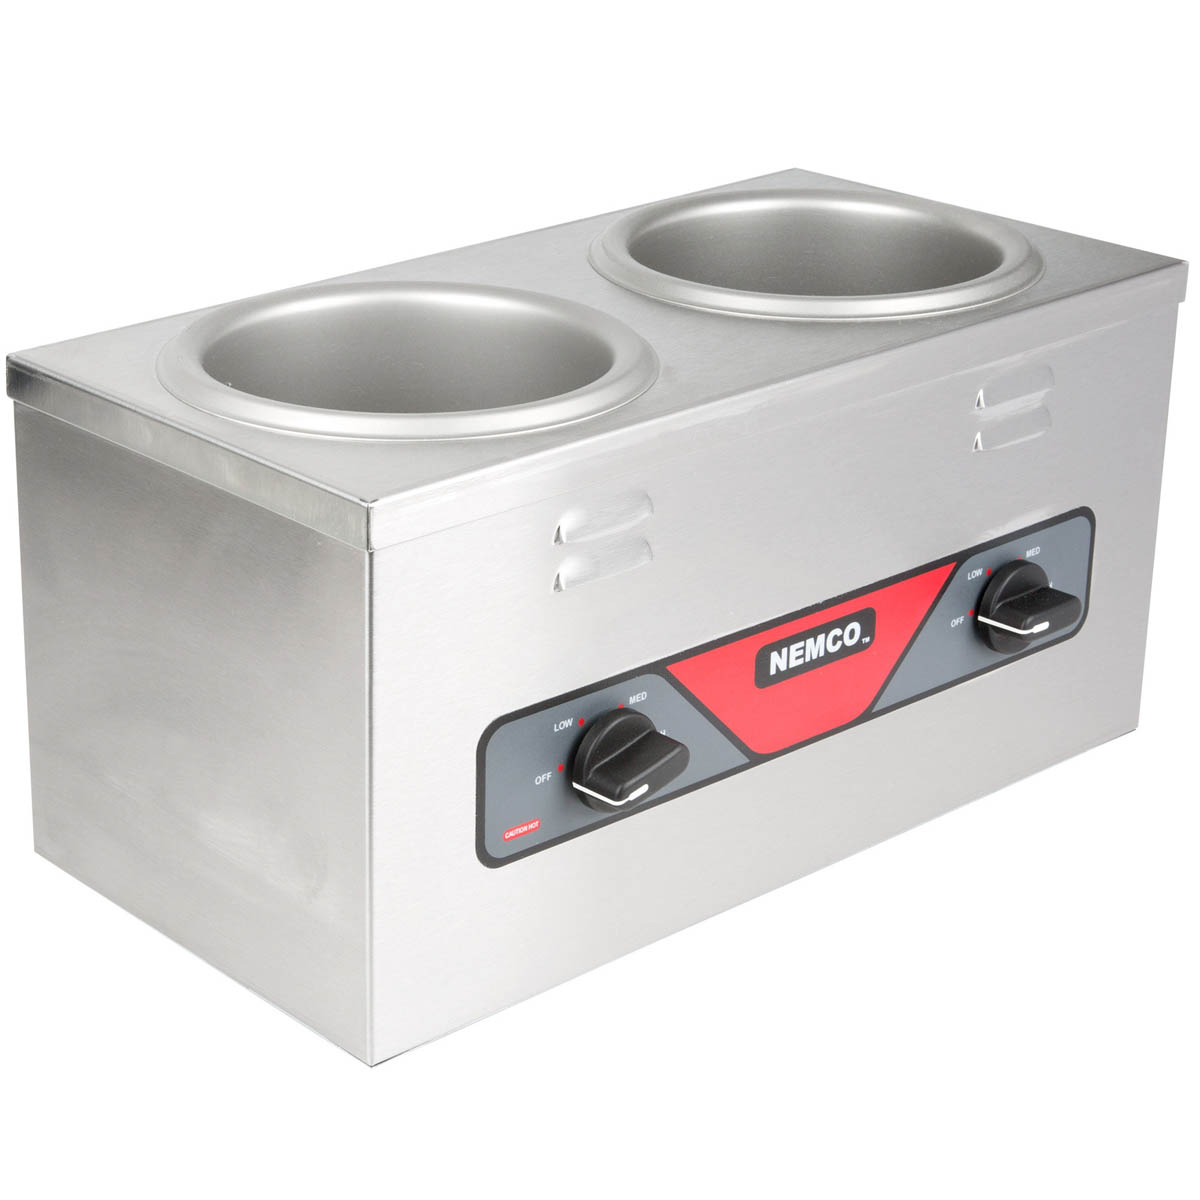 Nemco 6120A-ICL Countertop Food Pan Warmer w/ 4-Qt., Adjustable Thermostat, 2 Wells